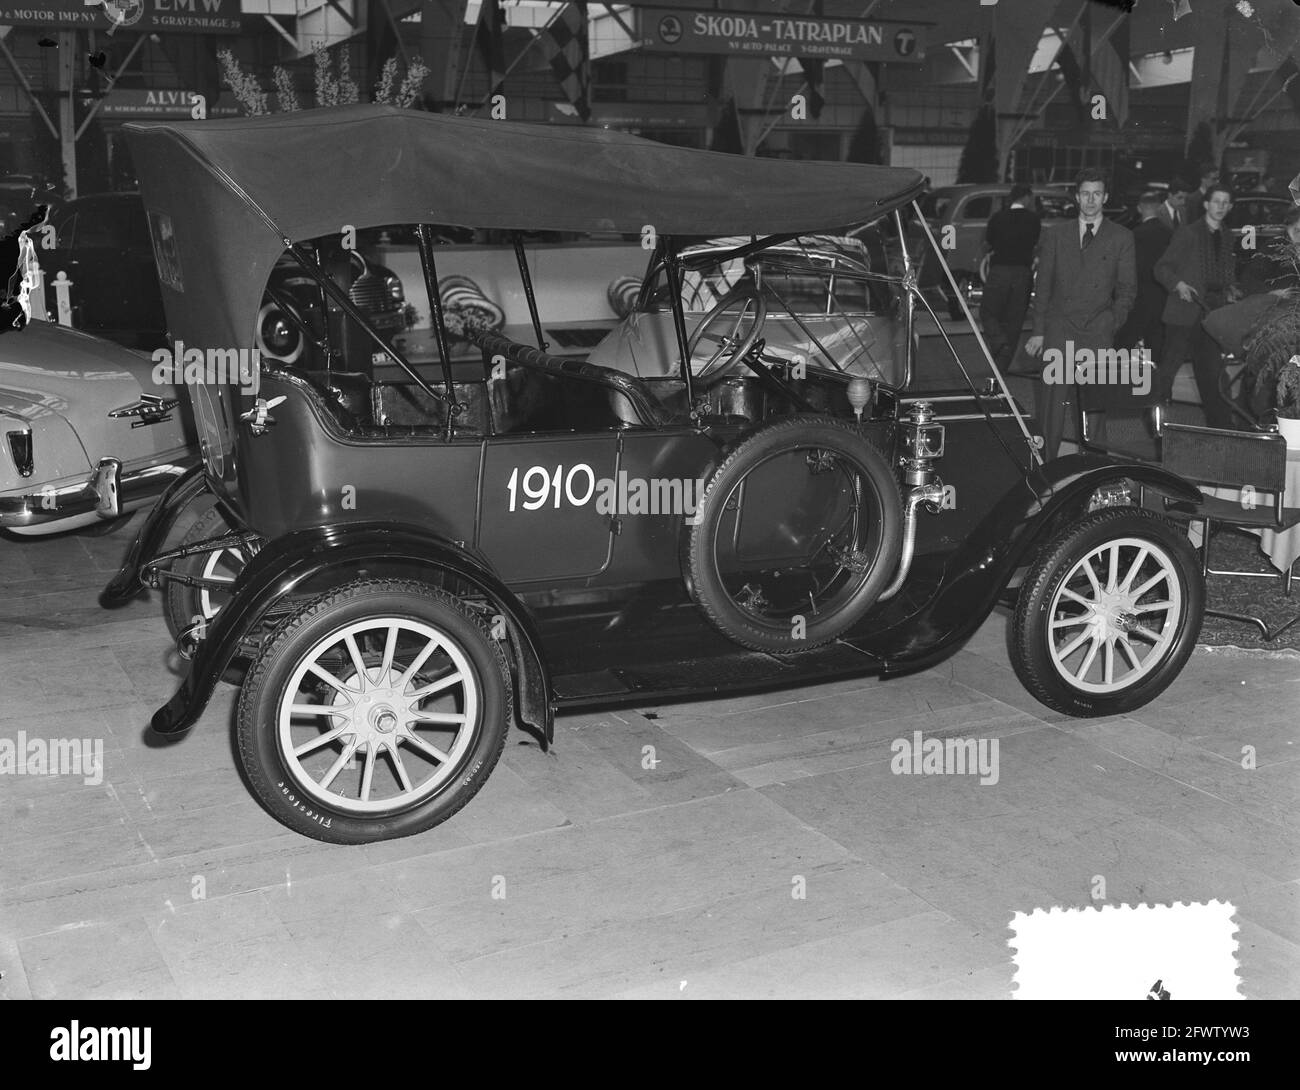 Thirtieth automobile fair RAI (oldest car 1910), 28 February 1952, WAGEN, automobile exhibitions, The Netherlands, 20th century press agency photo, news to remember, documentary, historic photography 1945-1990, visual stories, human history of the Twentieth Century, capturing moments in time Stock Photo